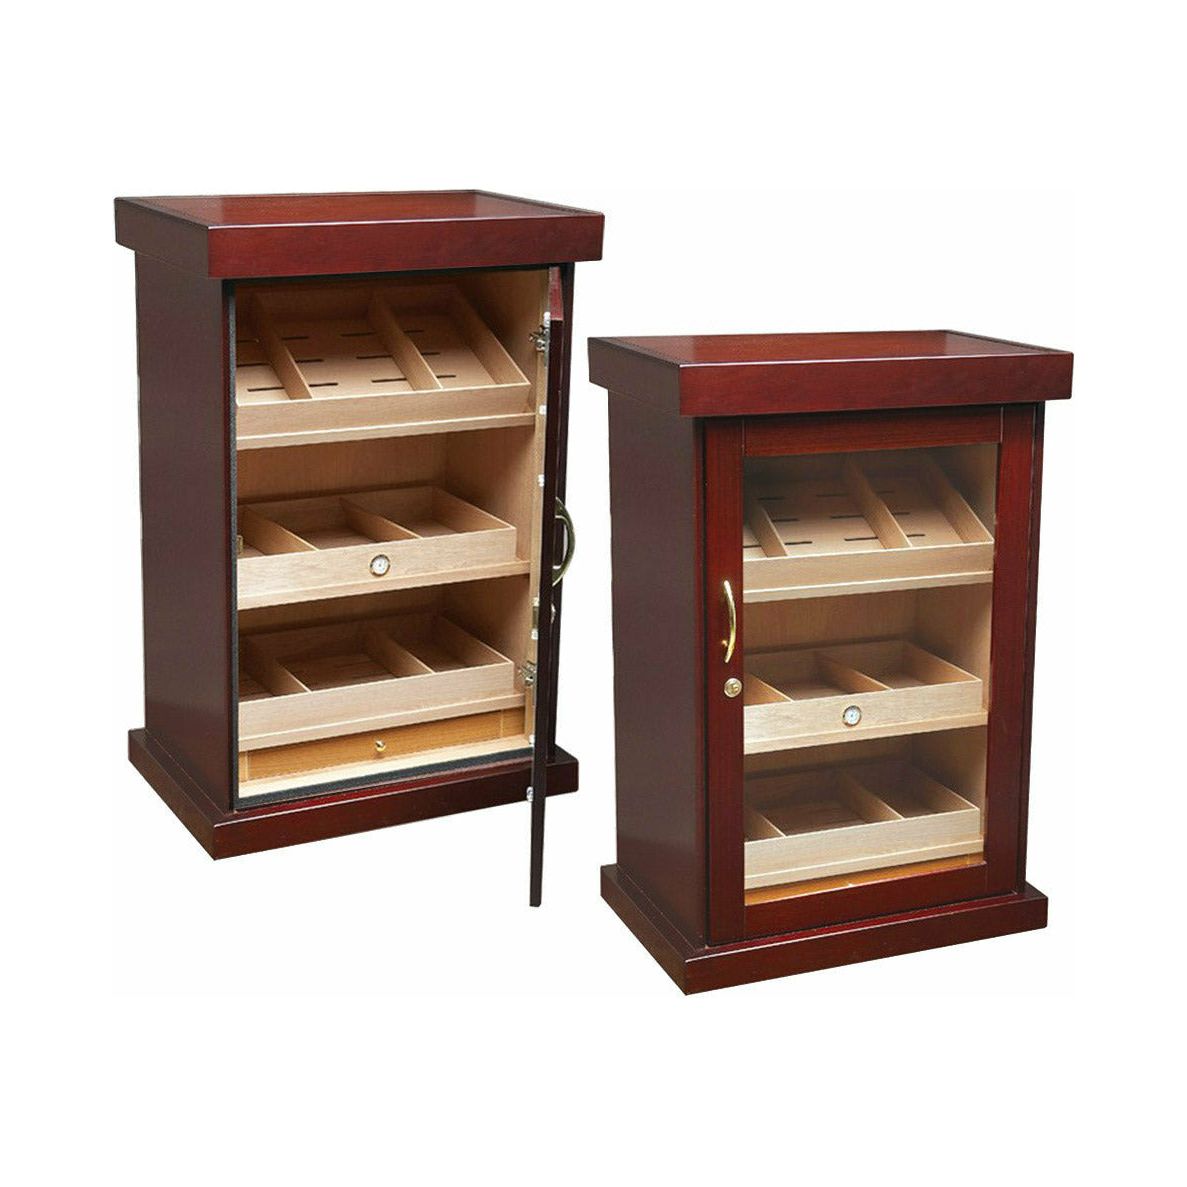 Prestige Import Group - The Spartacus Humidor - 1000 Ct. Cabinet Humidor-Prestige Import Group-Wine Whiskey and Smoke